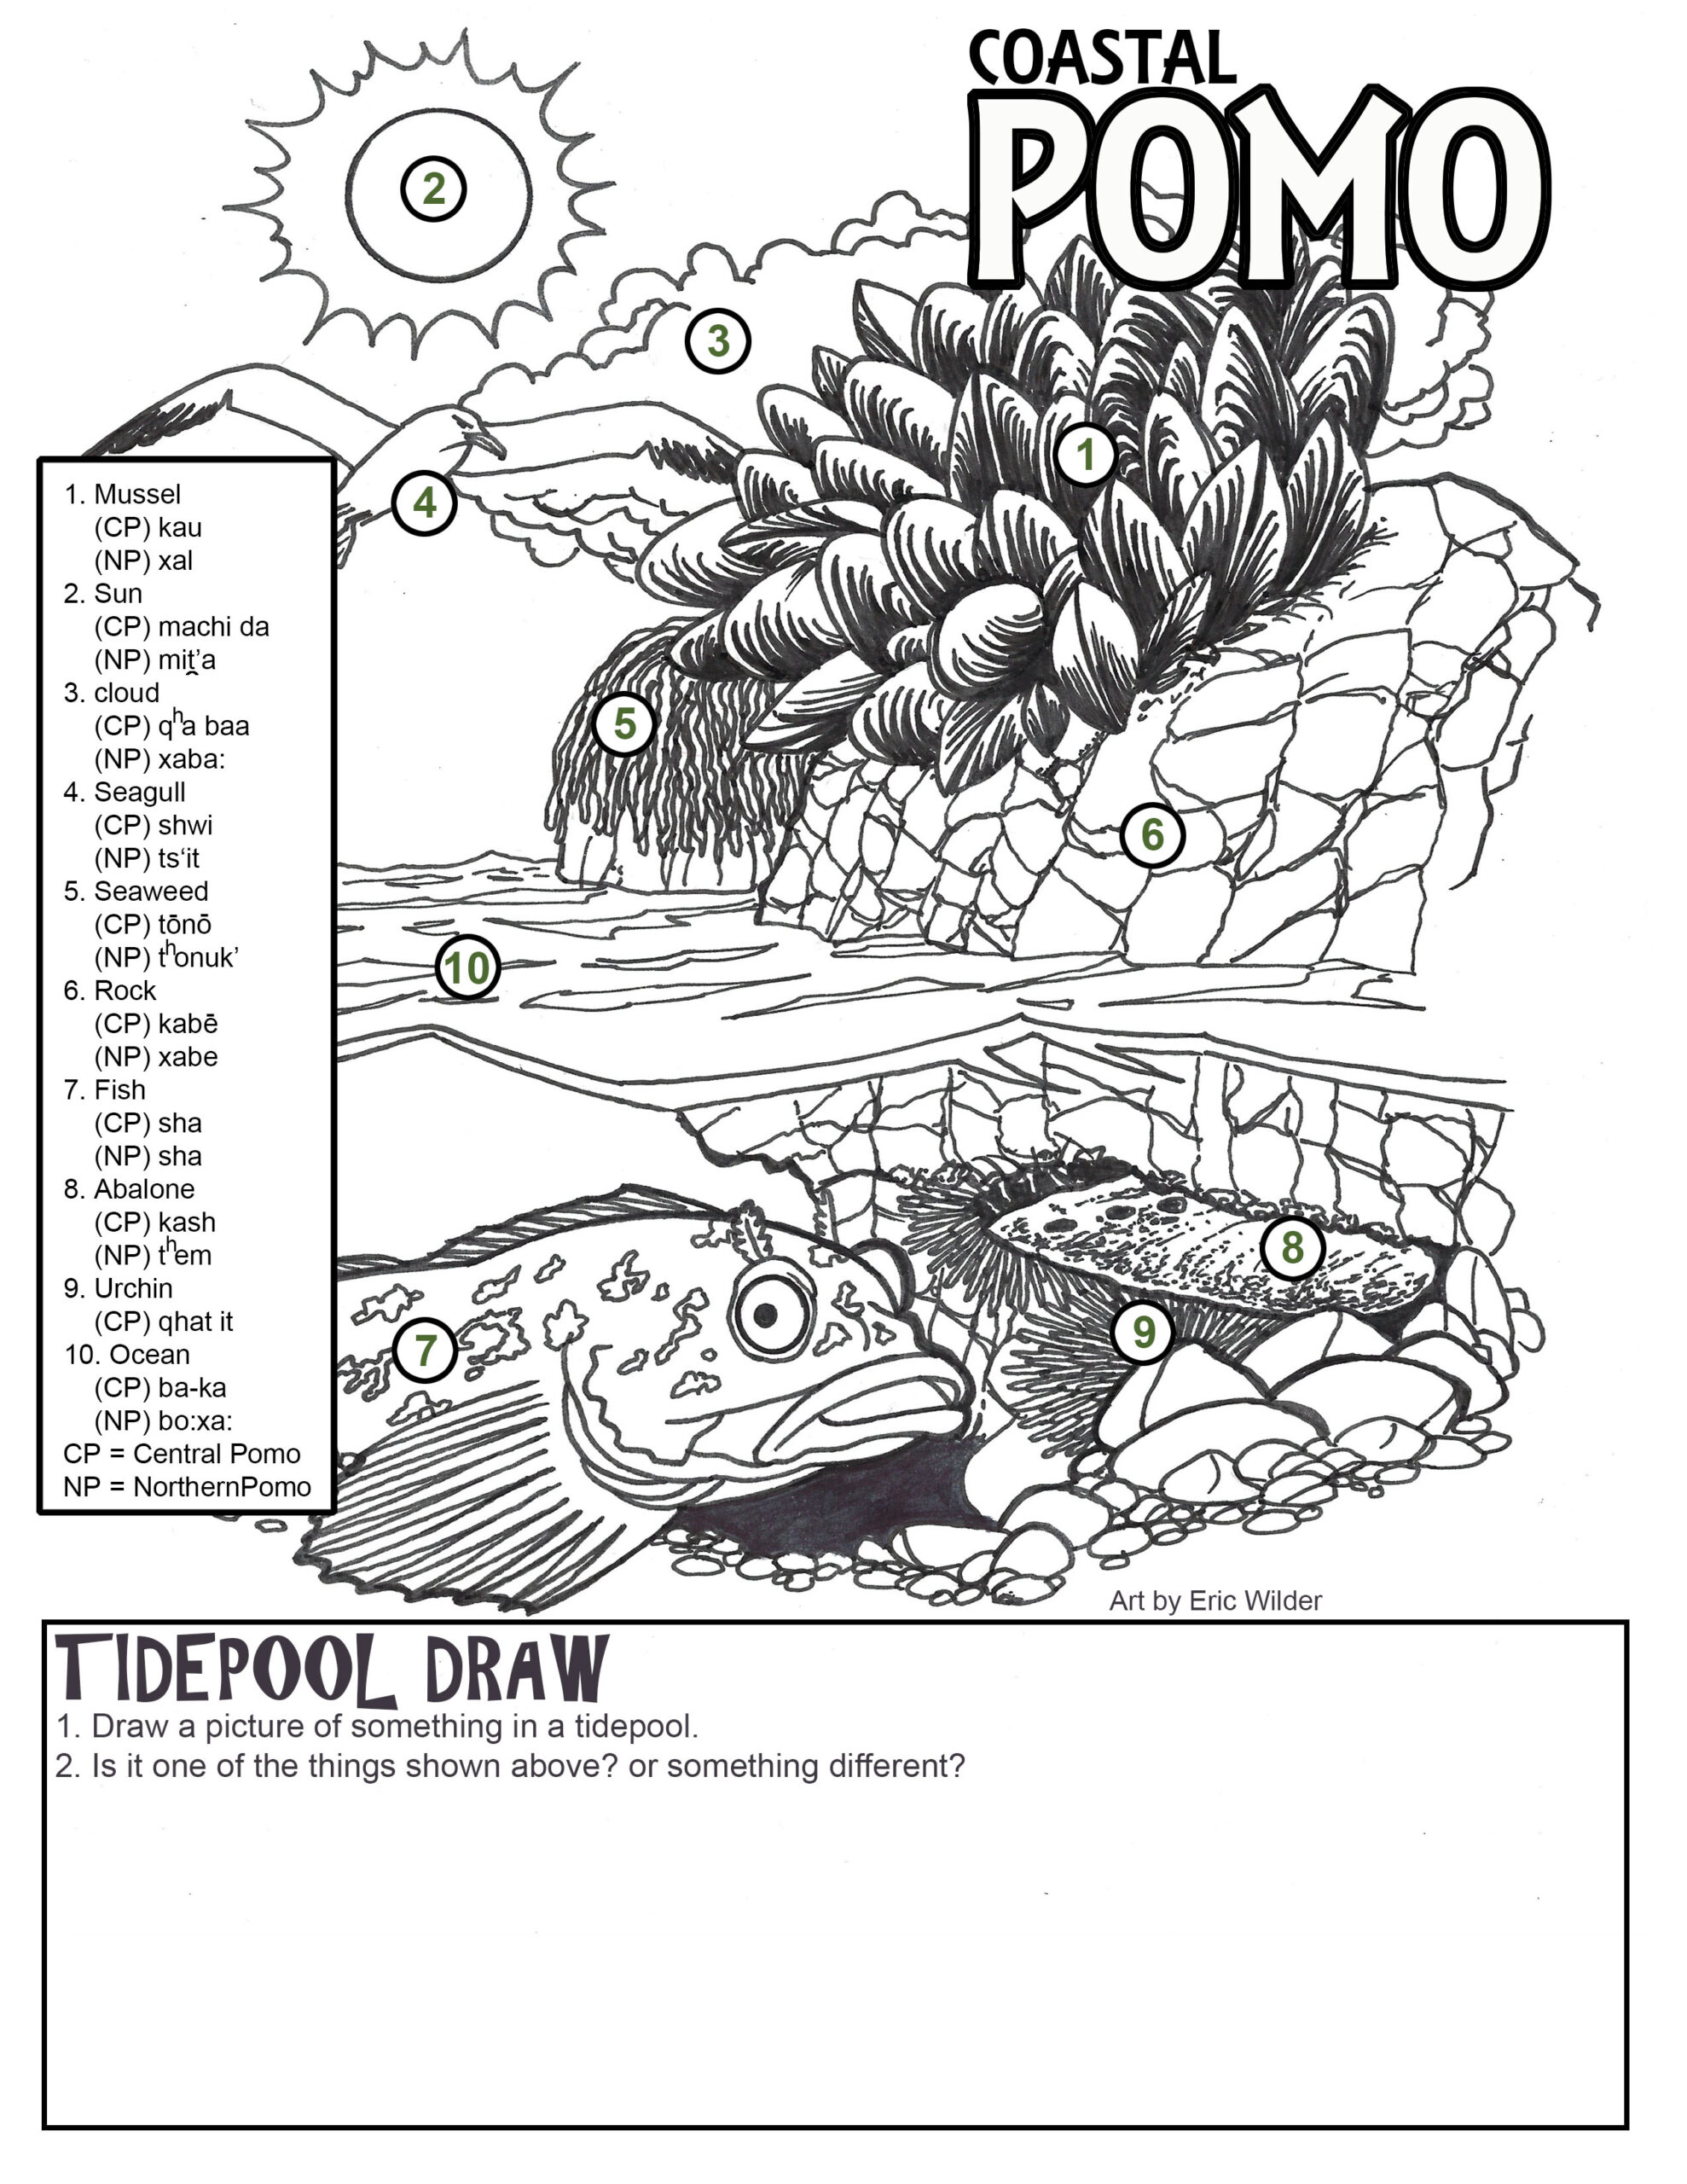 Pomo activity page: This page was included in MendoParks Park Adventure Coast Kits (distributed to local families as well as available at MendoParks.org as a free PDF). The concept was contributed by Javier Silva, Sherwood Valley Band of Pomo Indians, with original artwork by Eric Wilder, Kashaya Pomo. This information was critical to include in our nature-based activity guides as it may be the only information local youth receive about local tribes that is actually written by tribal members